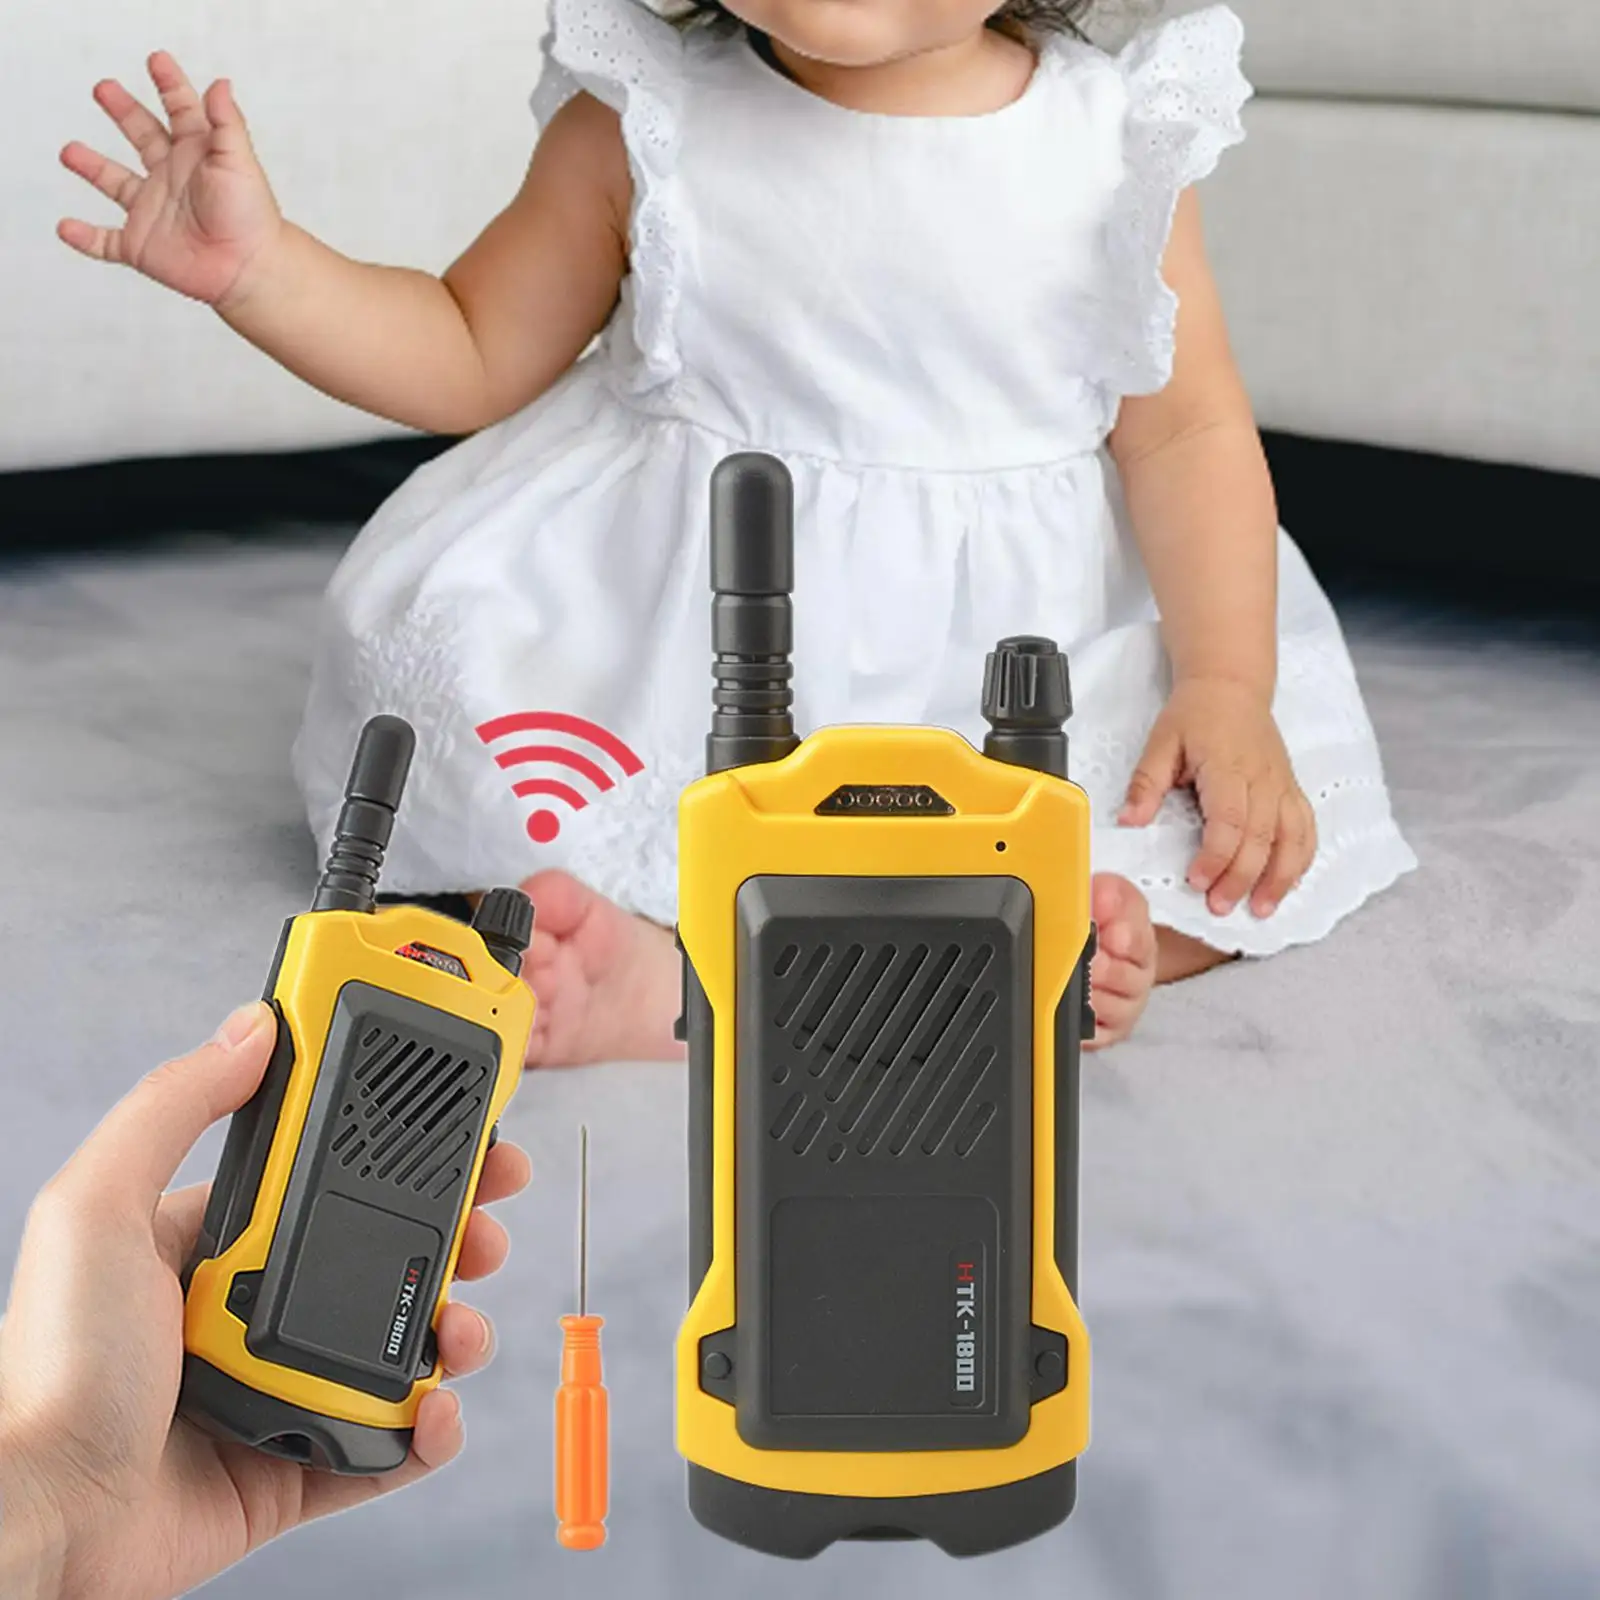 Wireless Conversation 2 Pieces Electronic Gadgets Kids Talkies for Camping